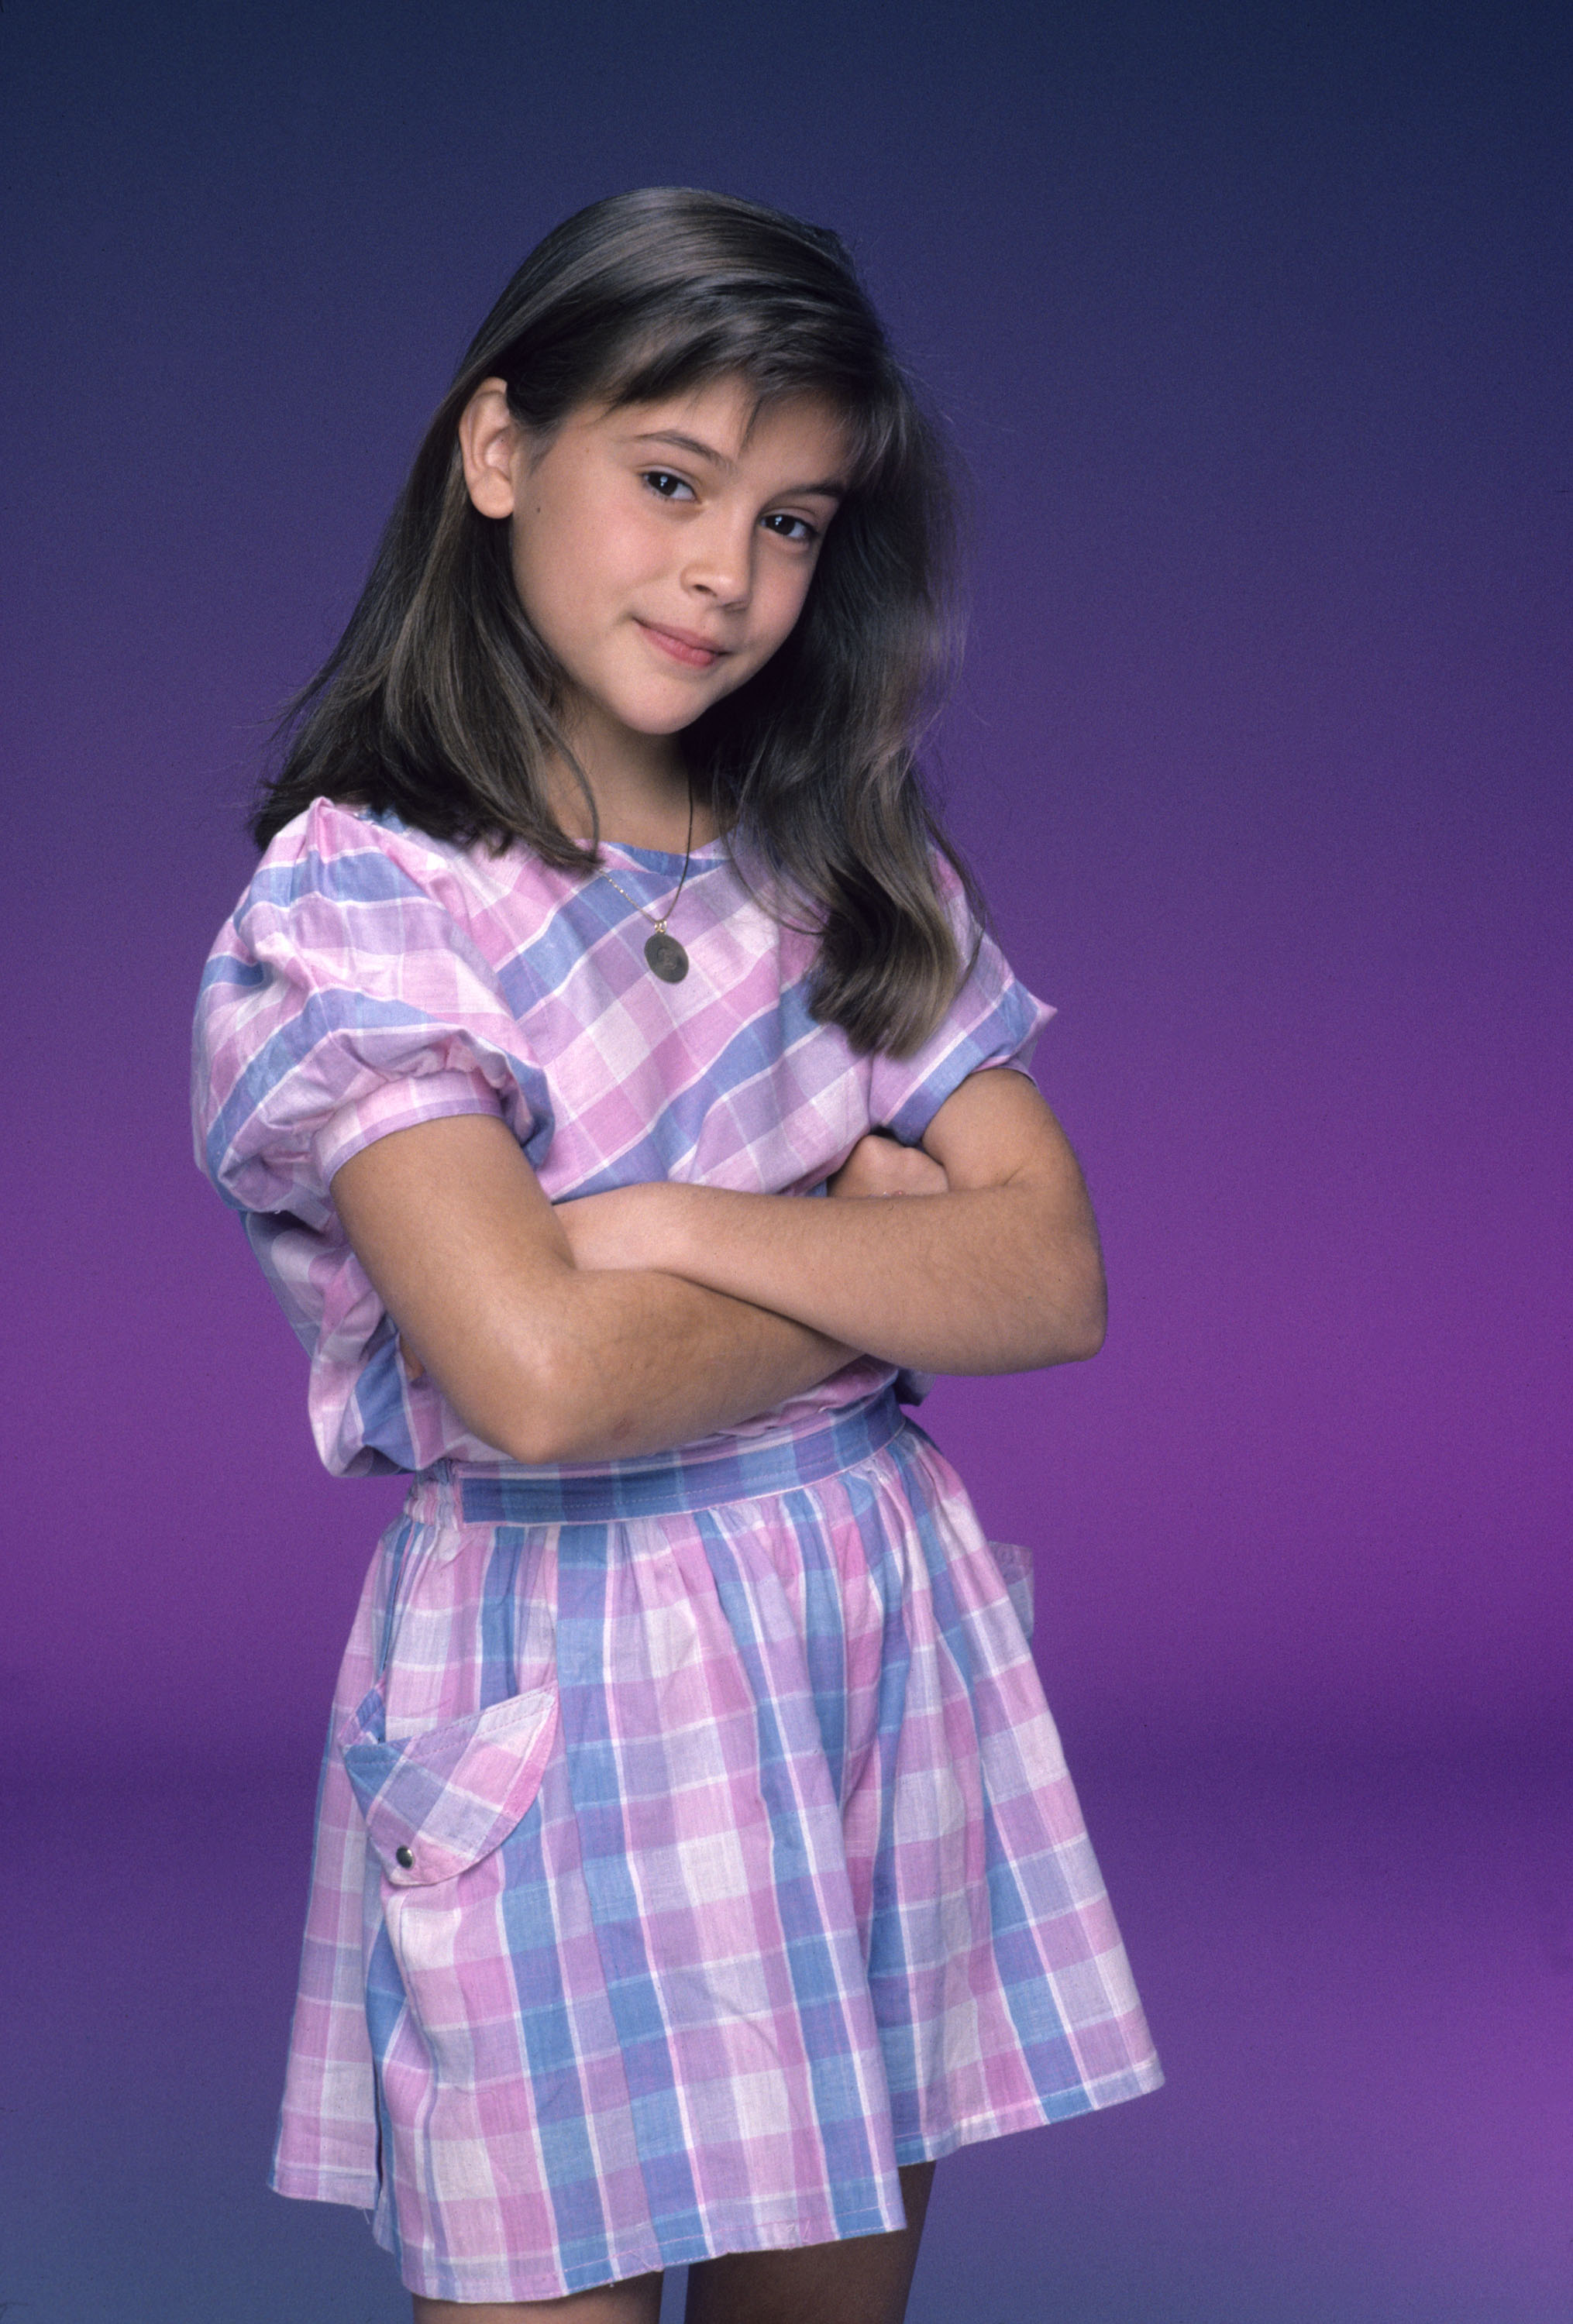 Alyssa Milano photographed for "Who's the Boss?" in 1984 | Source: Getty Images